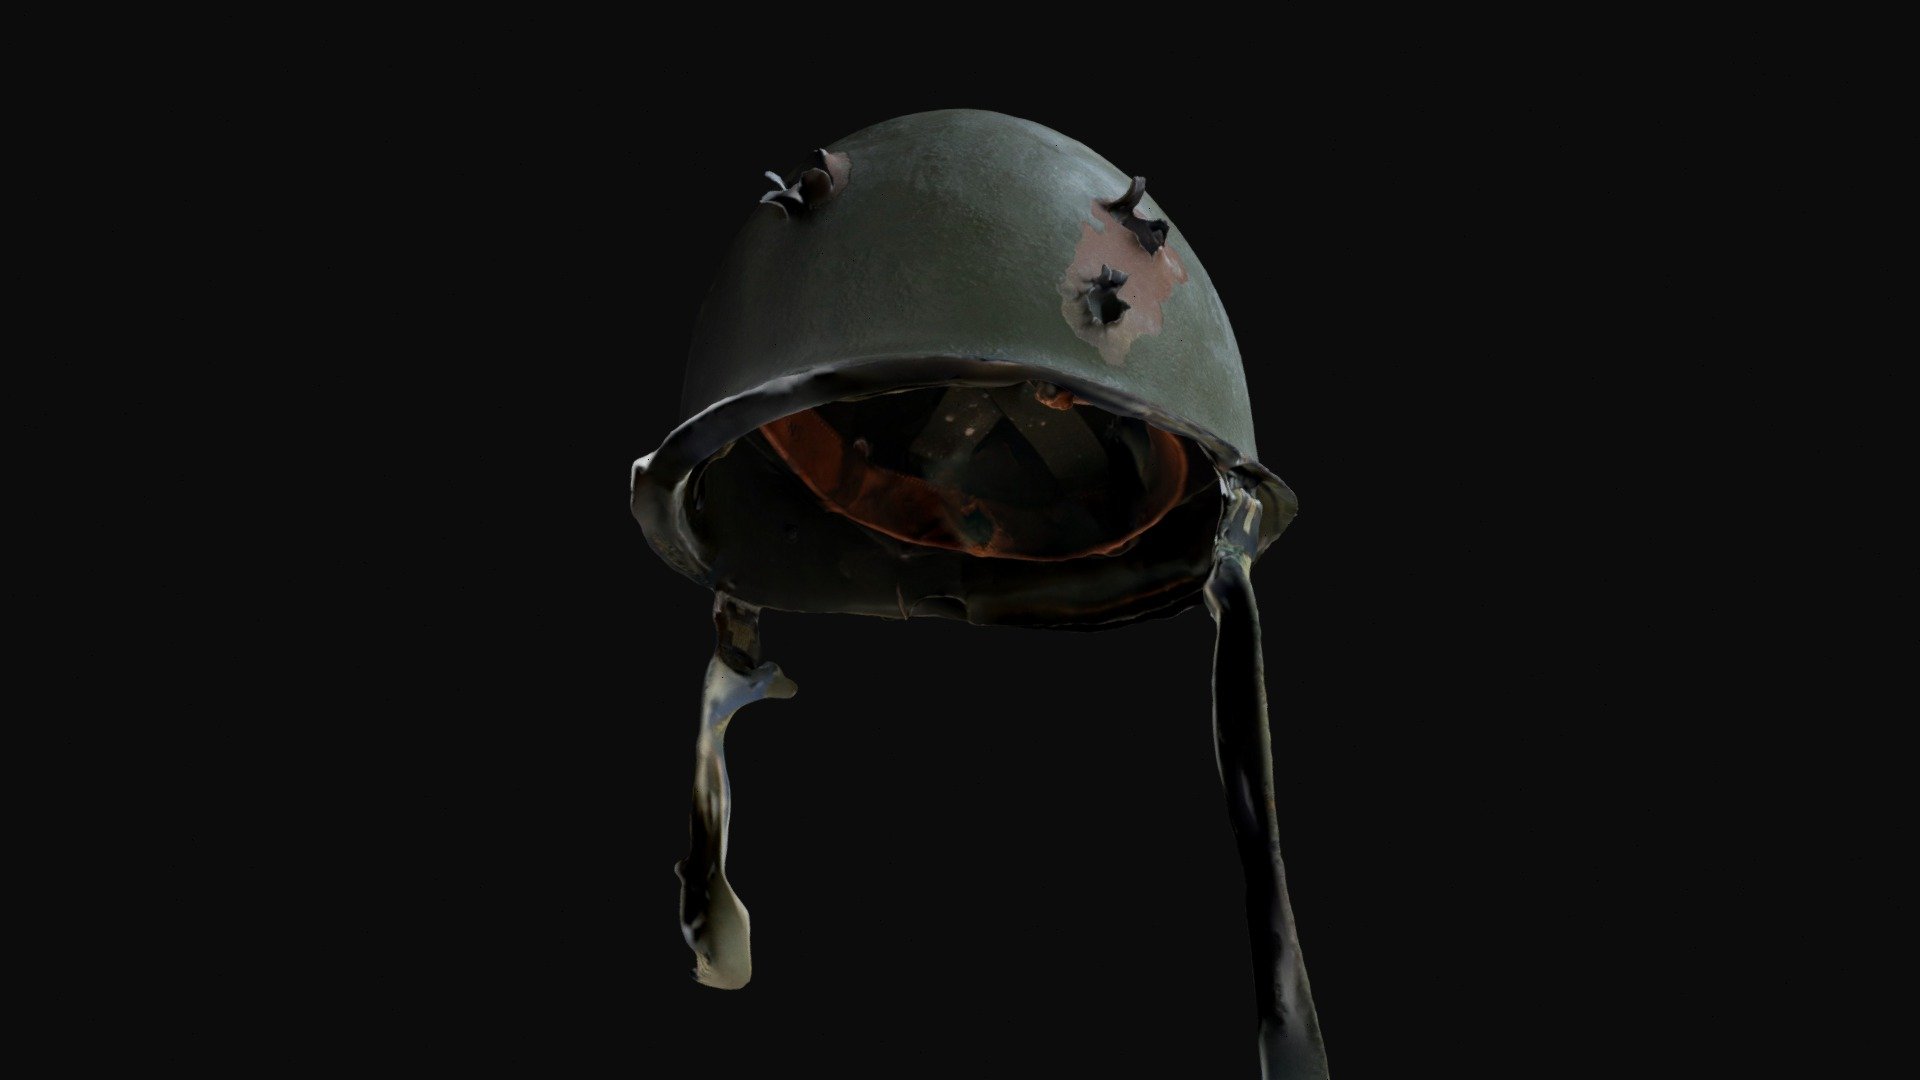 A 3D Scan of a Helmet with bullet holes

Can be used in game

Only been cropped. Raw Scan.

Created with Polycam - Helmet with bullet holes 3D Scan - Buy Royalty Free 3D model by BundemG 3d model